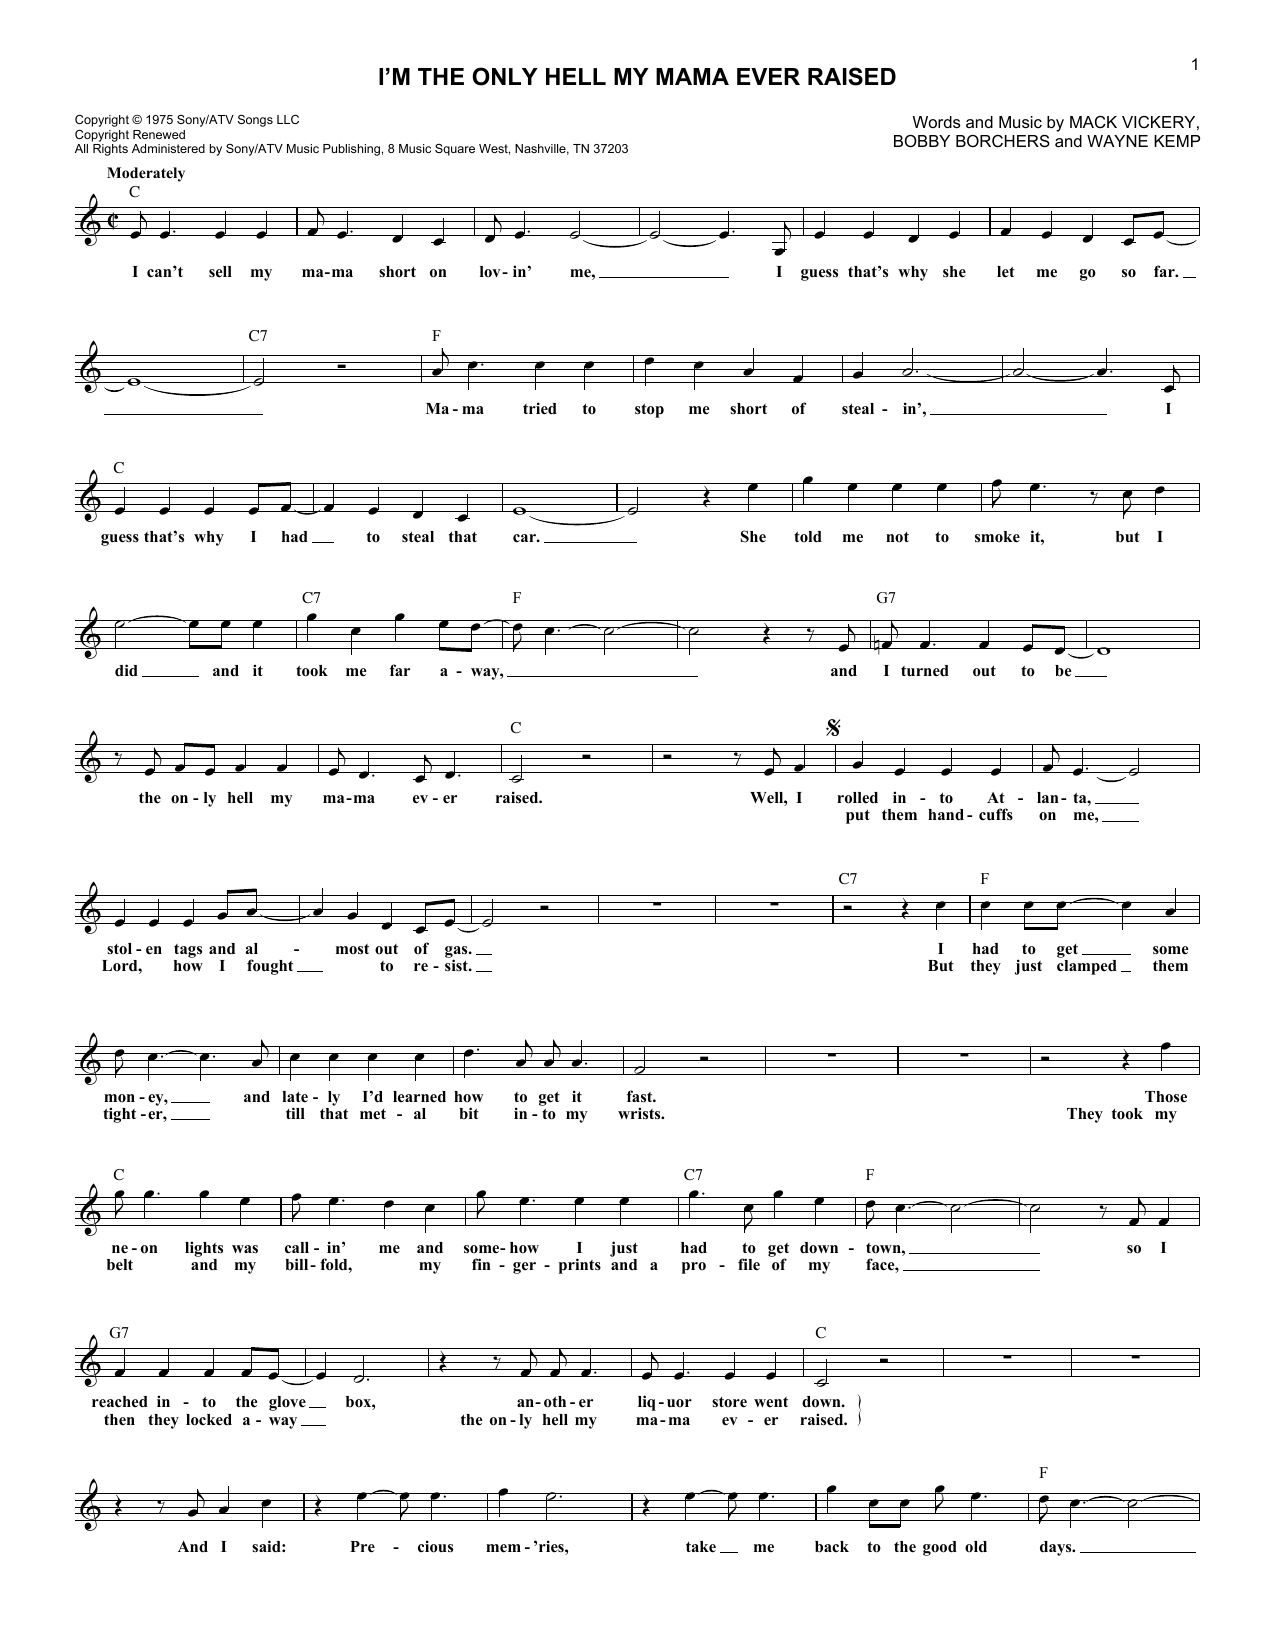 Download Johnny Paycheck I'm The Only Hell My Mama Ever Raised Sheet Music